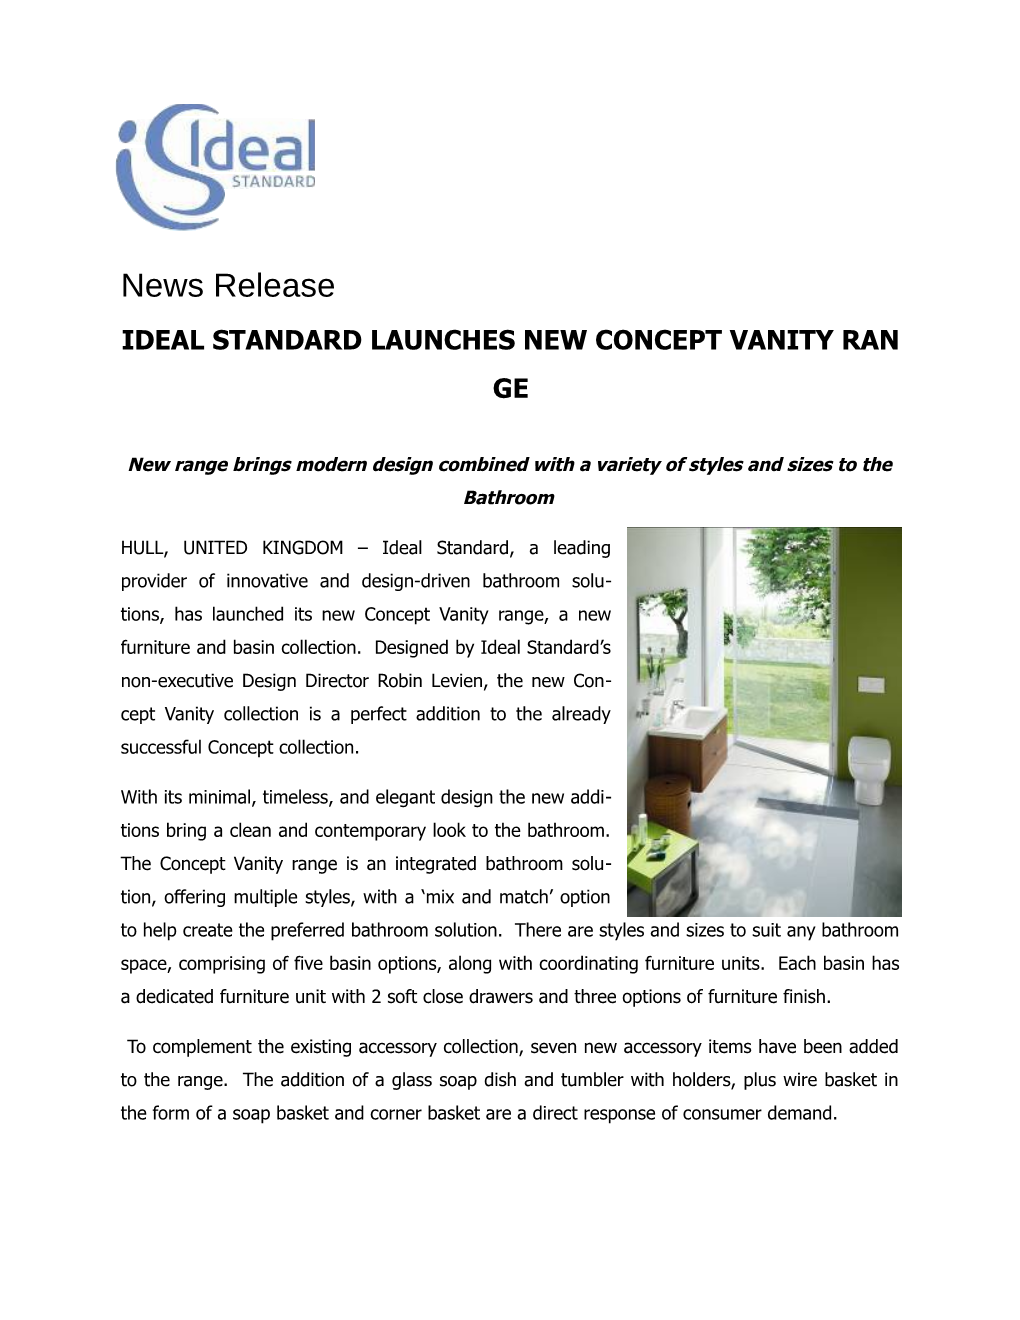 Ideal Standard Launches New Concept Vanity Range